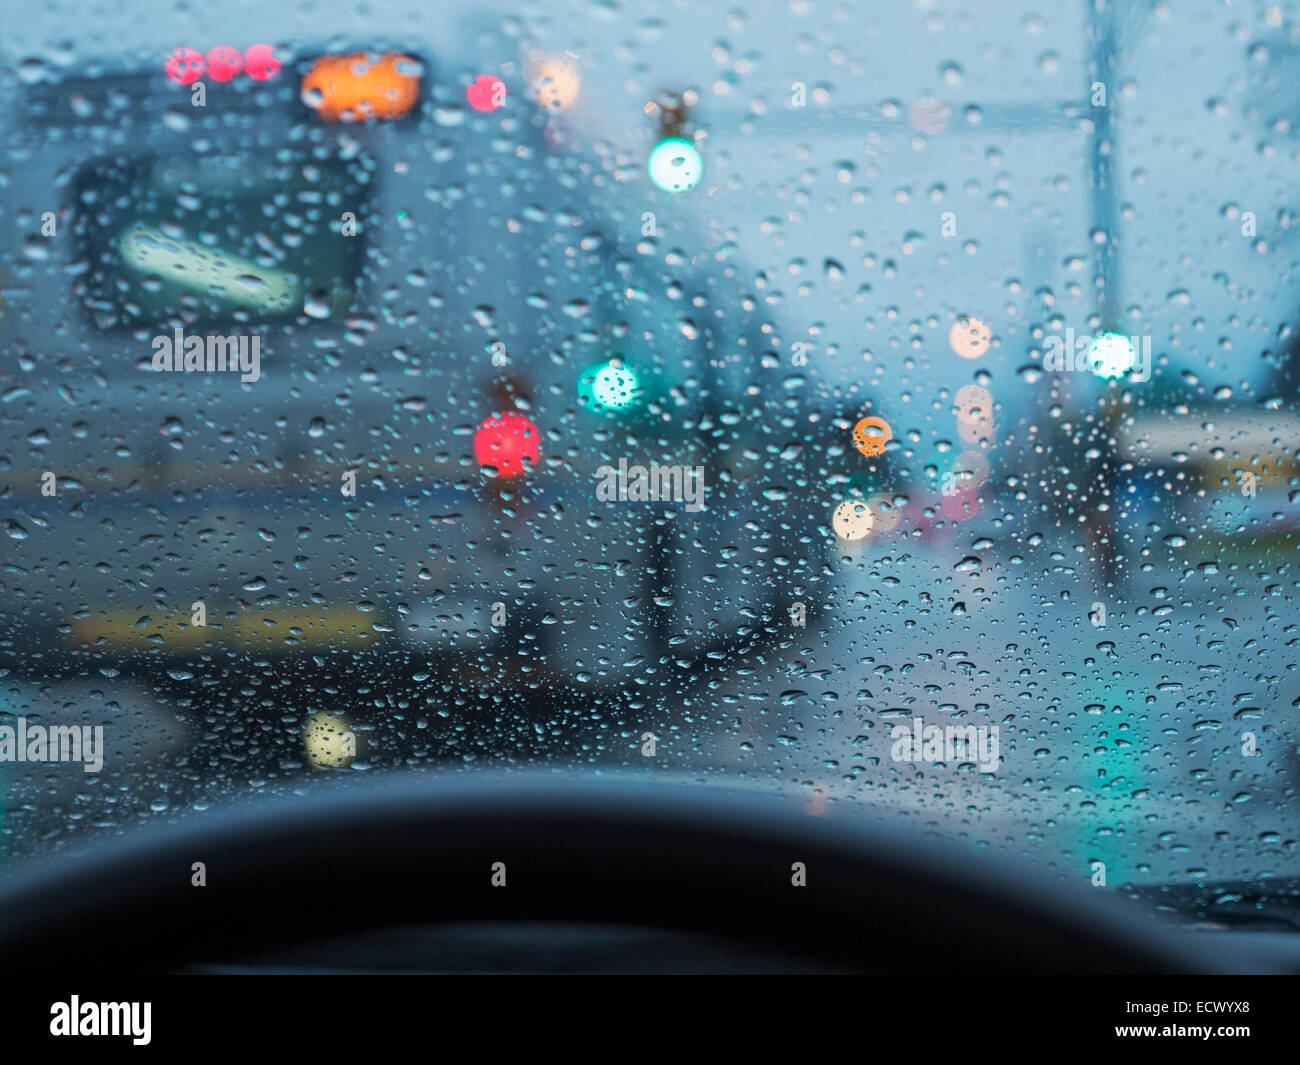 Poor visibility driving conditions in heavy rain; drivers point of view Stock Photo